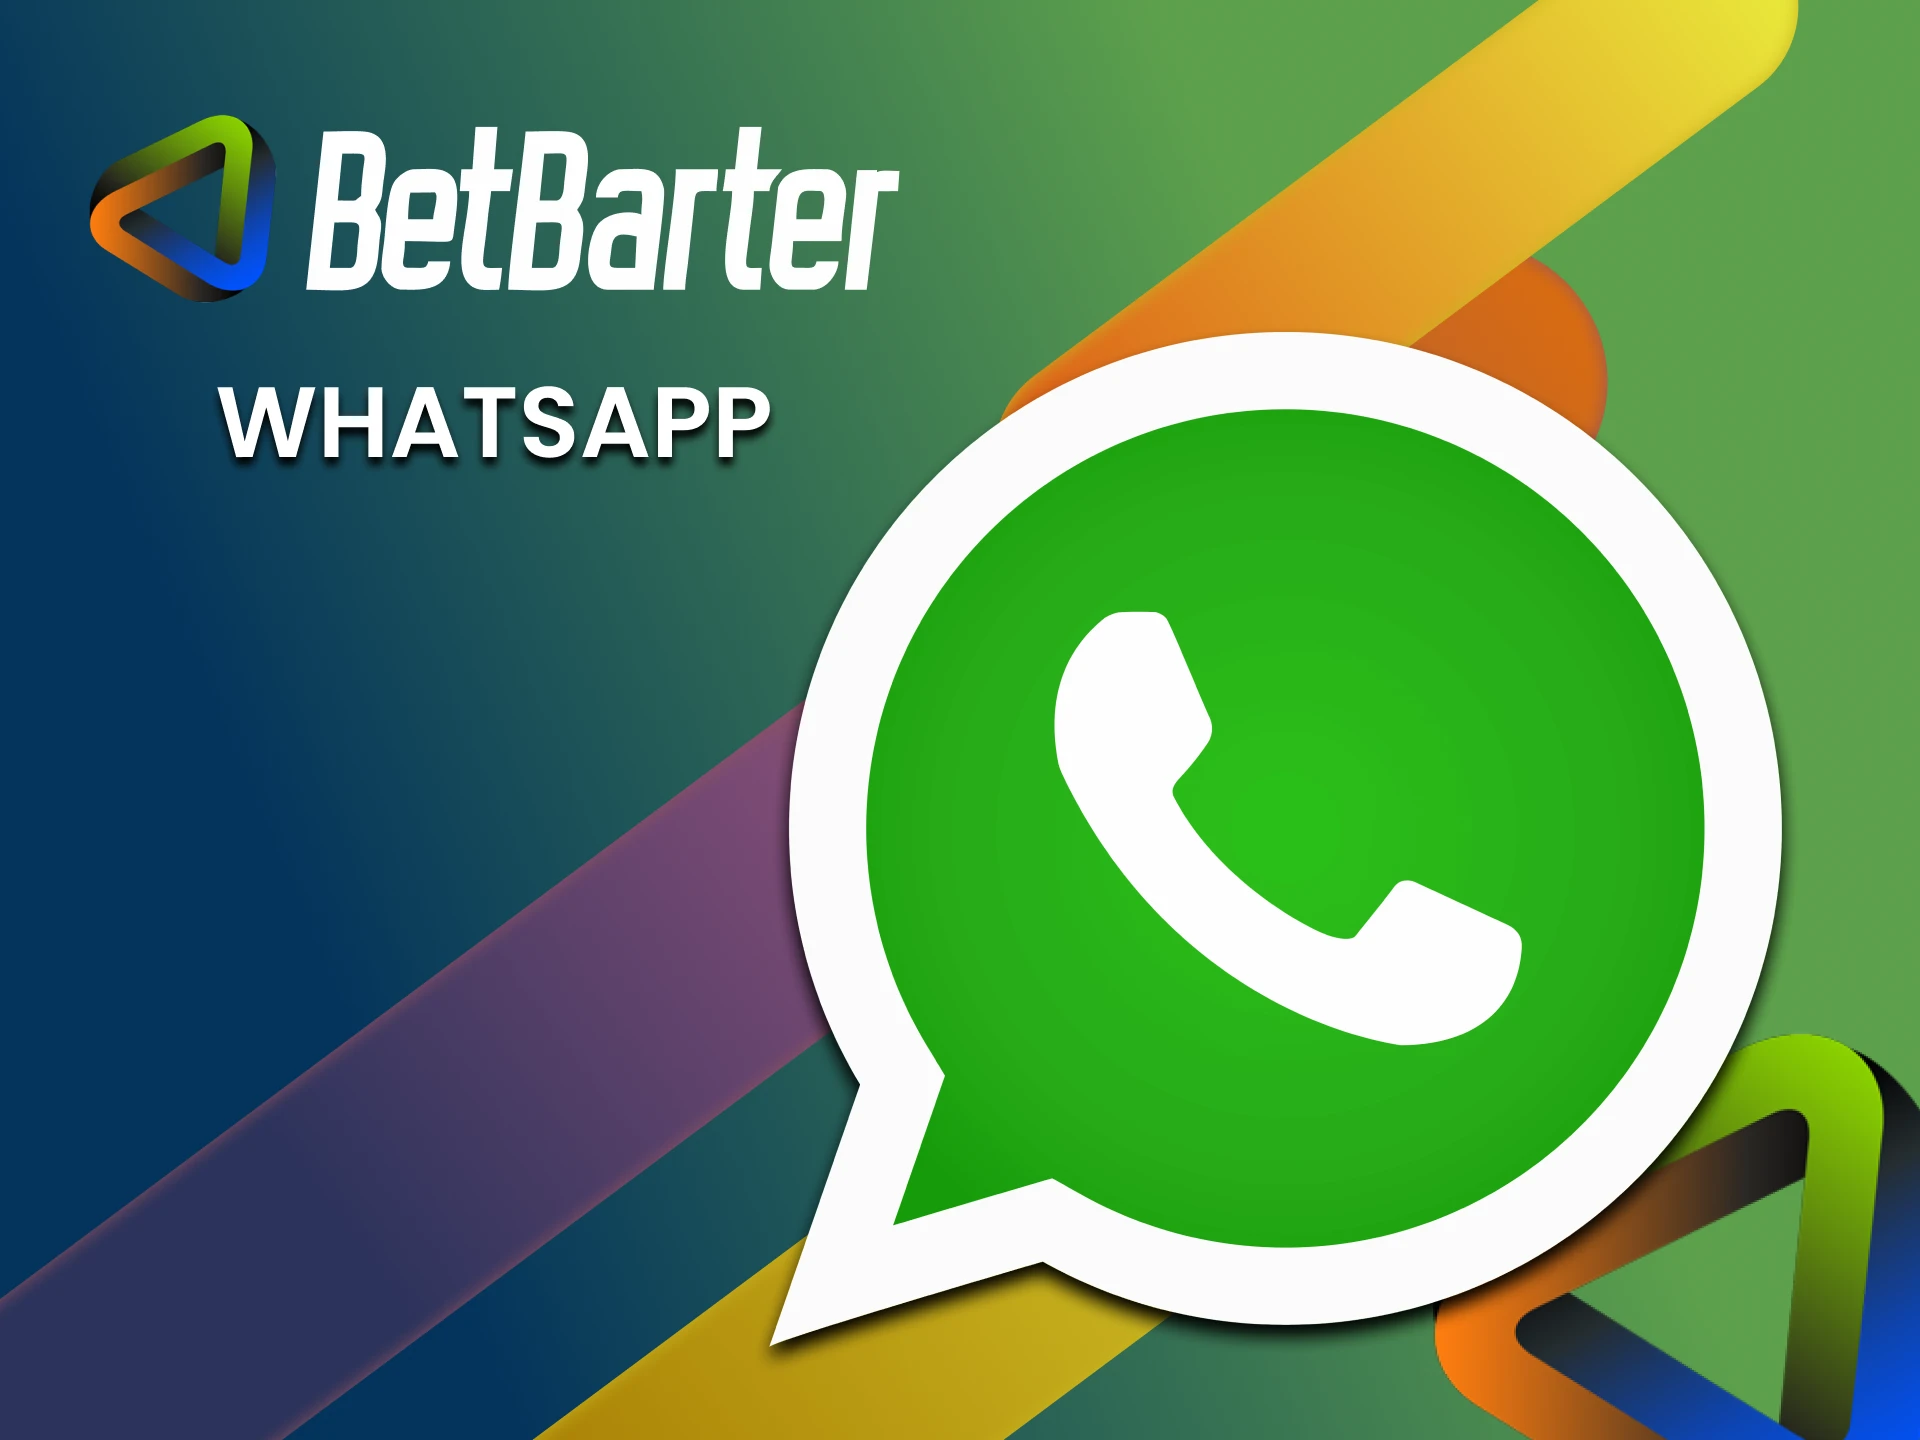 You can contact the BetBarter support team via whatsapp.